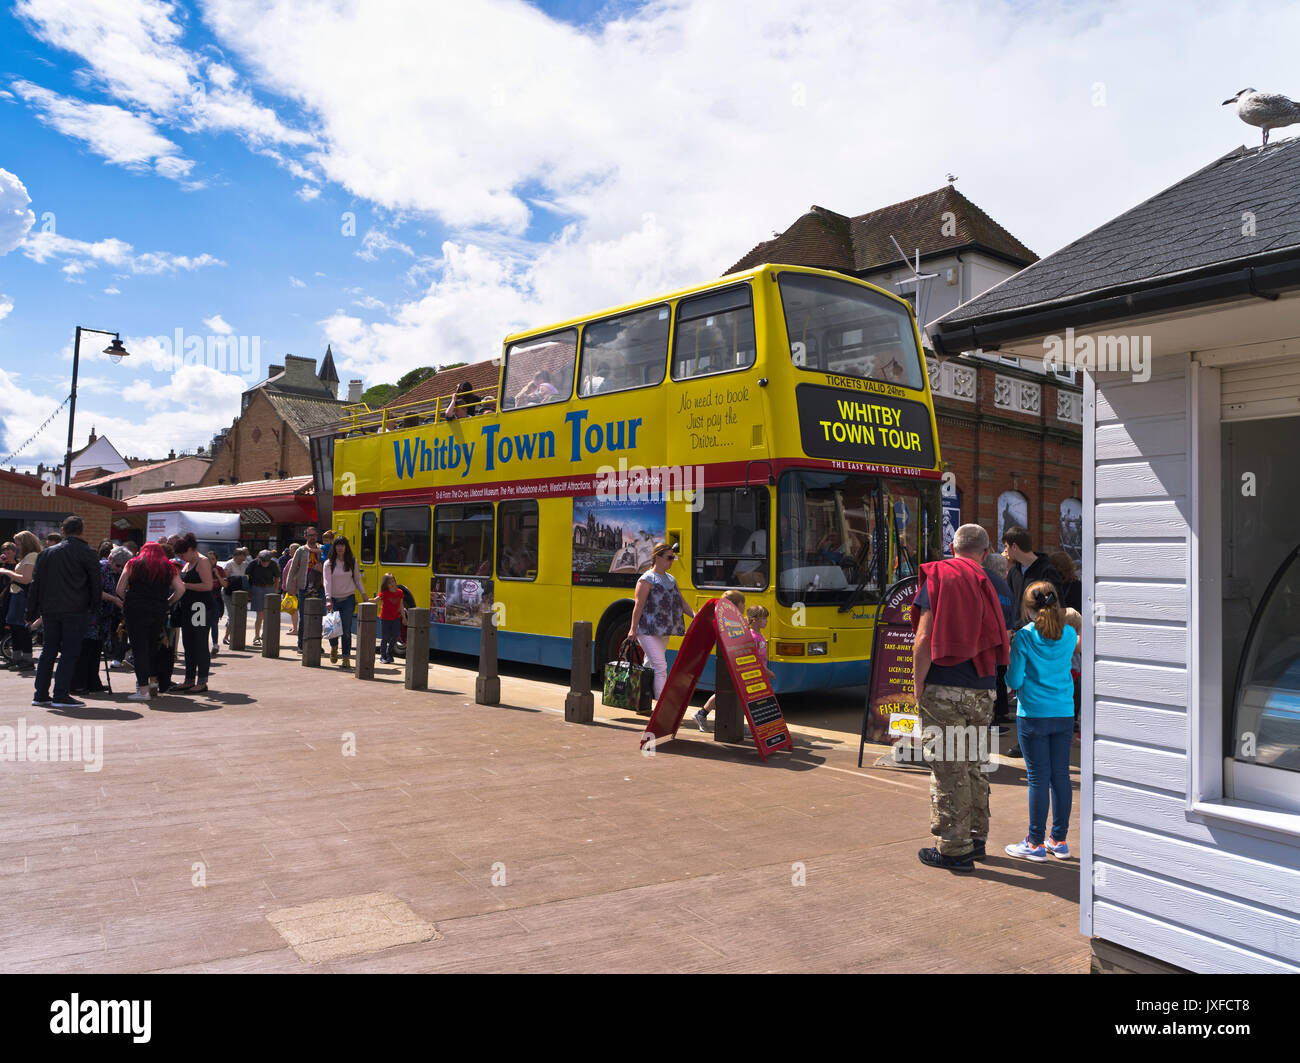 dh Whitby Town Tour bus WHITBY NORTH YORKSHIRE Opentop doubledecker people tourism excursion england uk Stock Photo